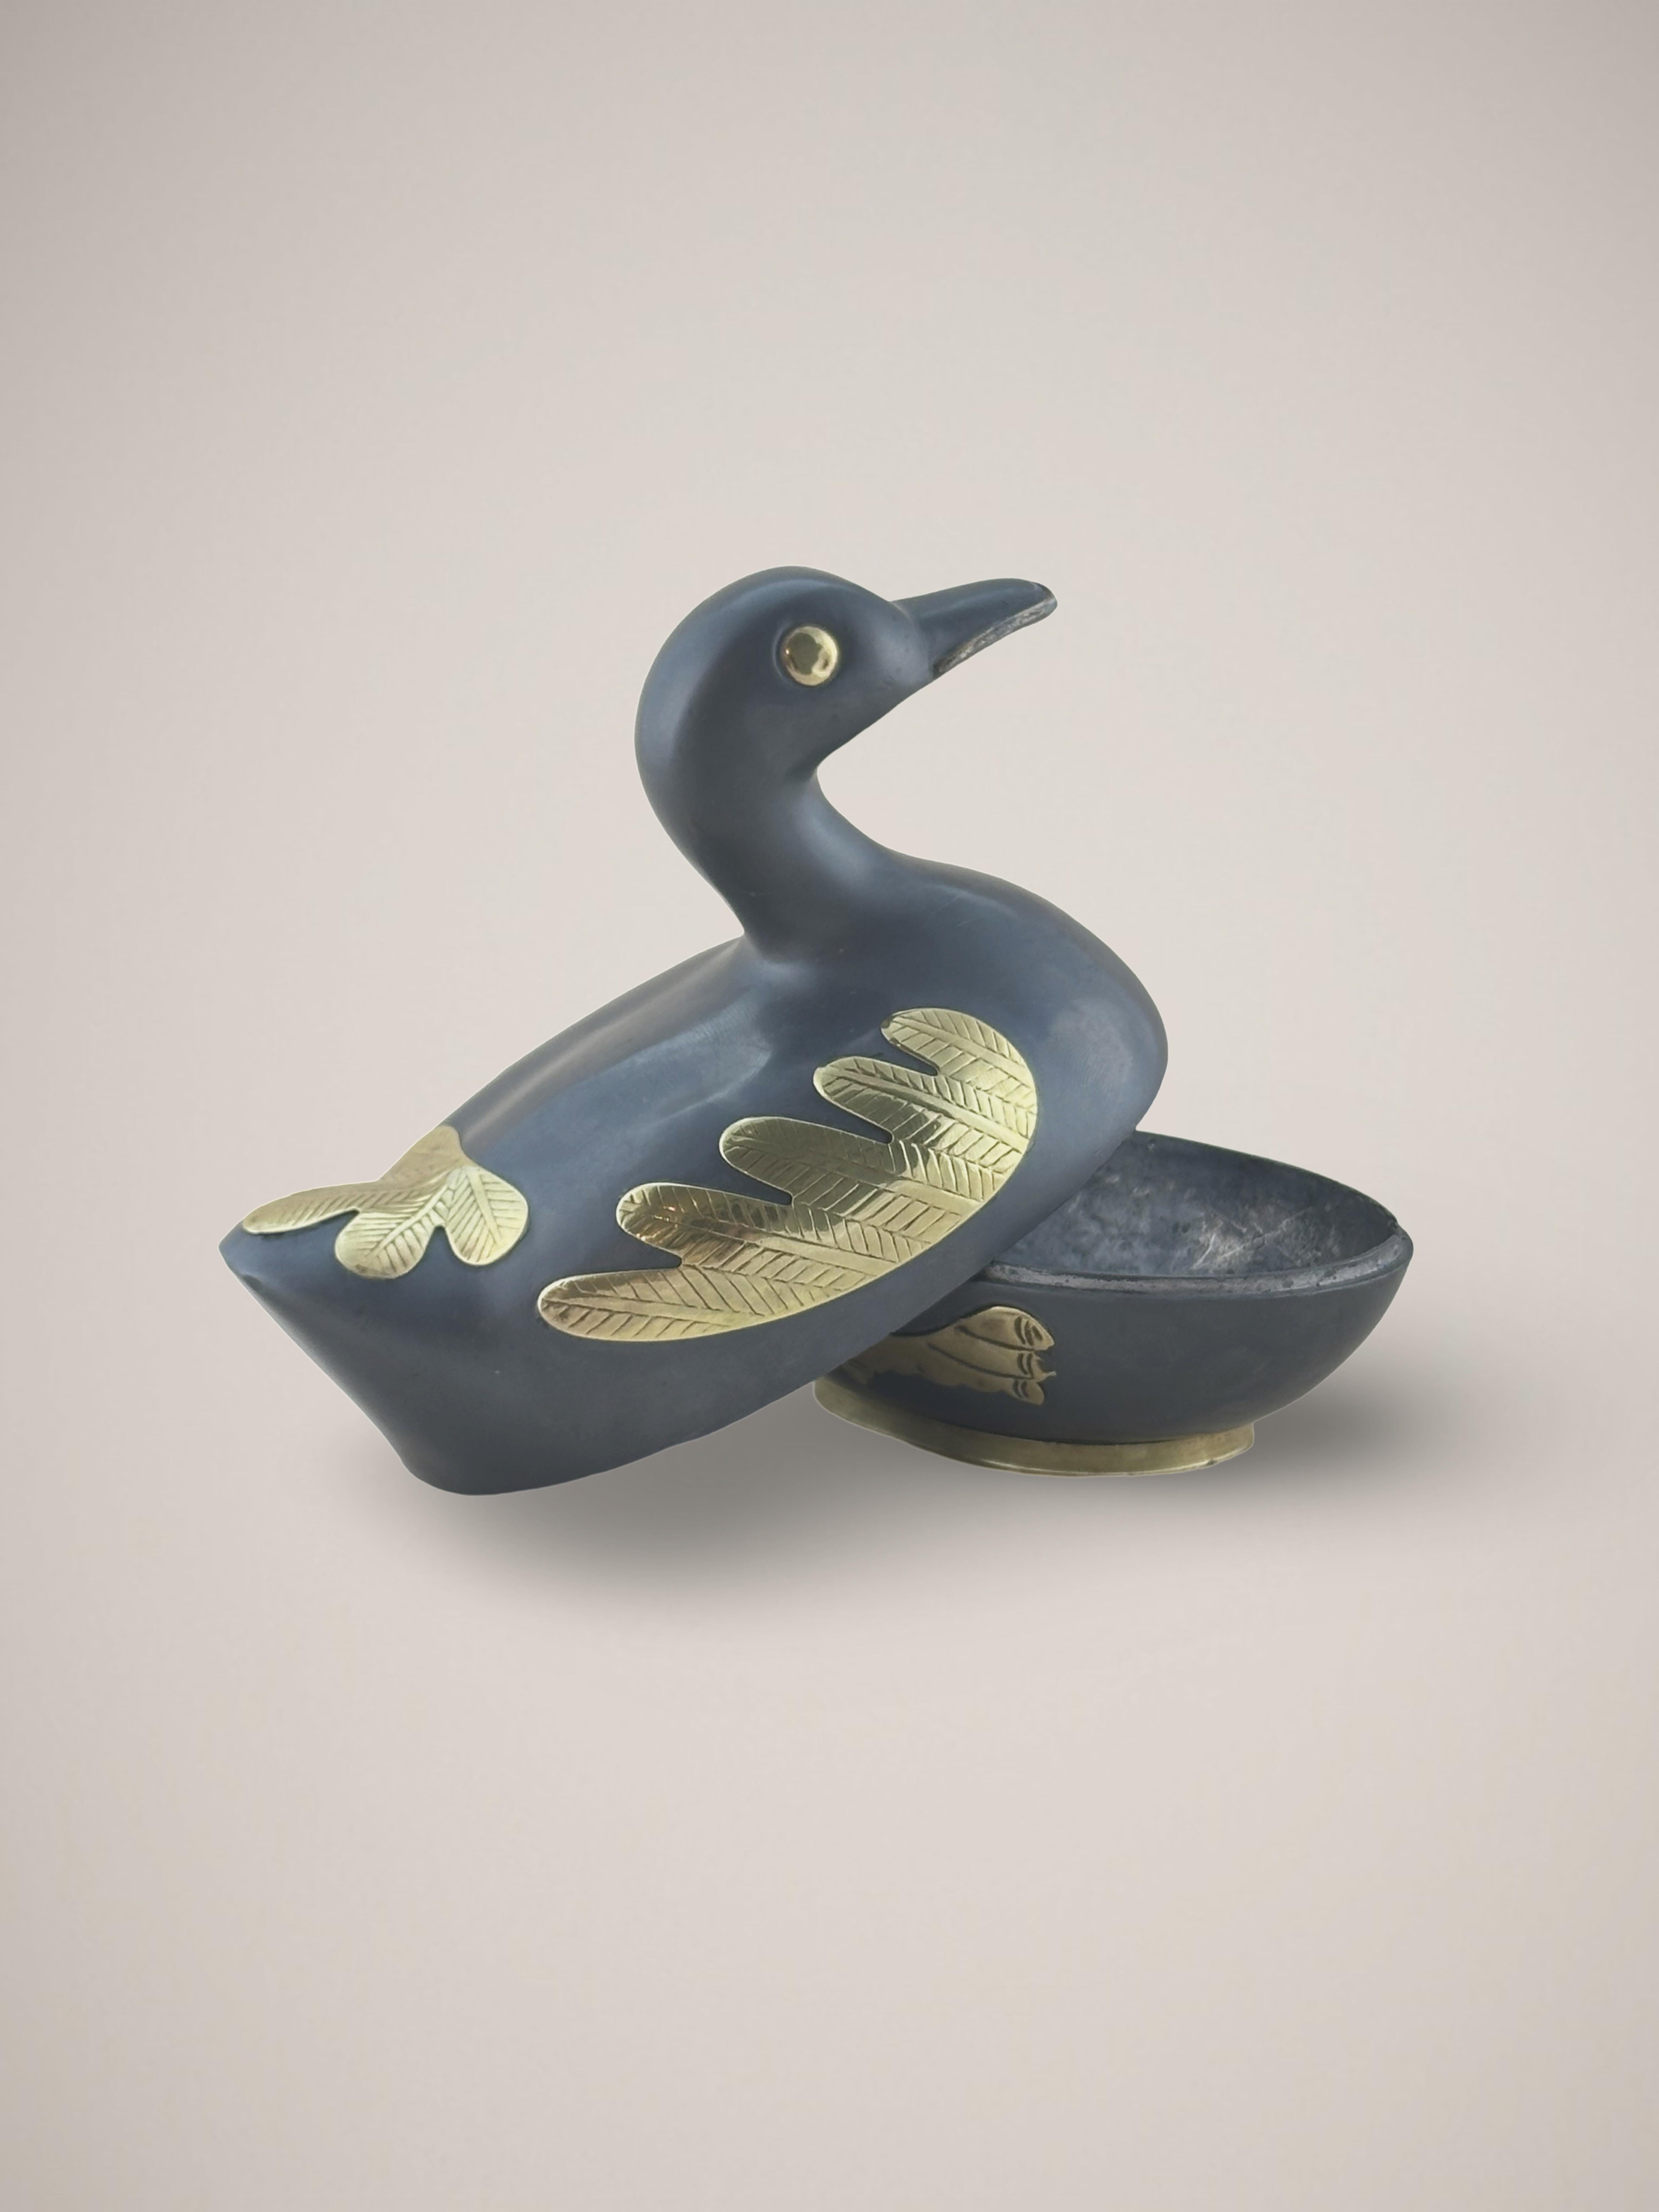 A pewter and brass trinket box made in Hong Kong during the mid-20th century. 


An iconic and utilitarian duck-shaped box that represents prosperity and fortune. The duck's body is cast in dark pewter metal, with thin, intricate overlays of